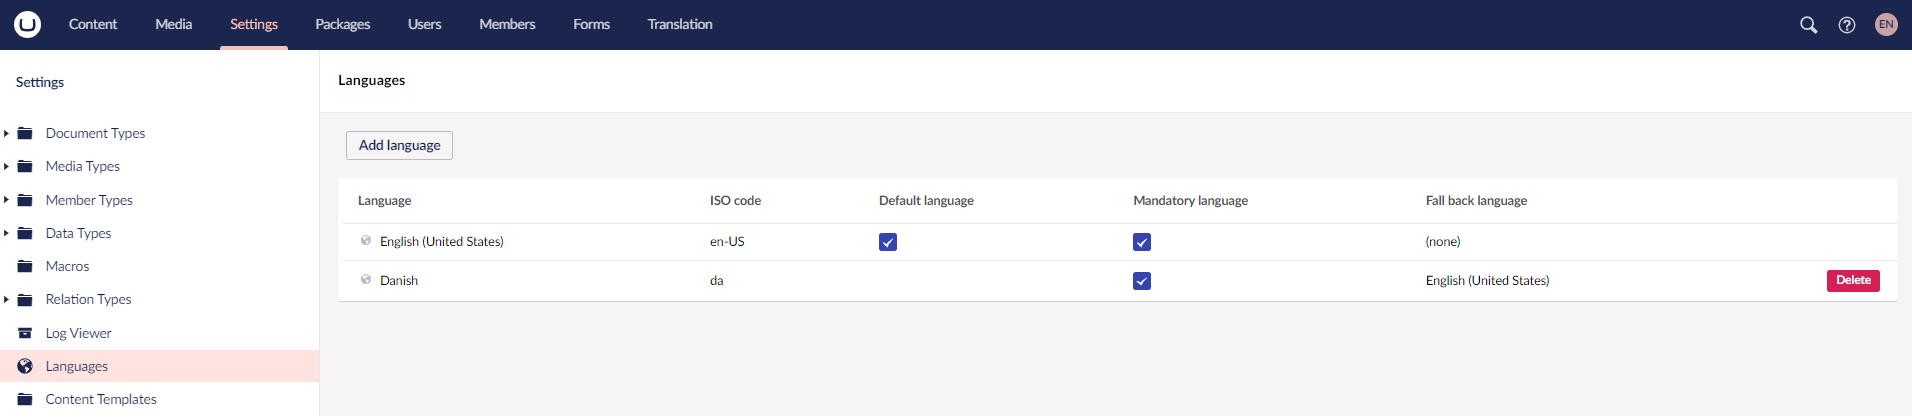 Umbraco Multilingual and Localisation Support graphic